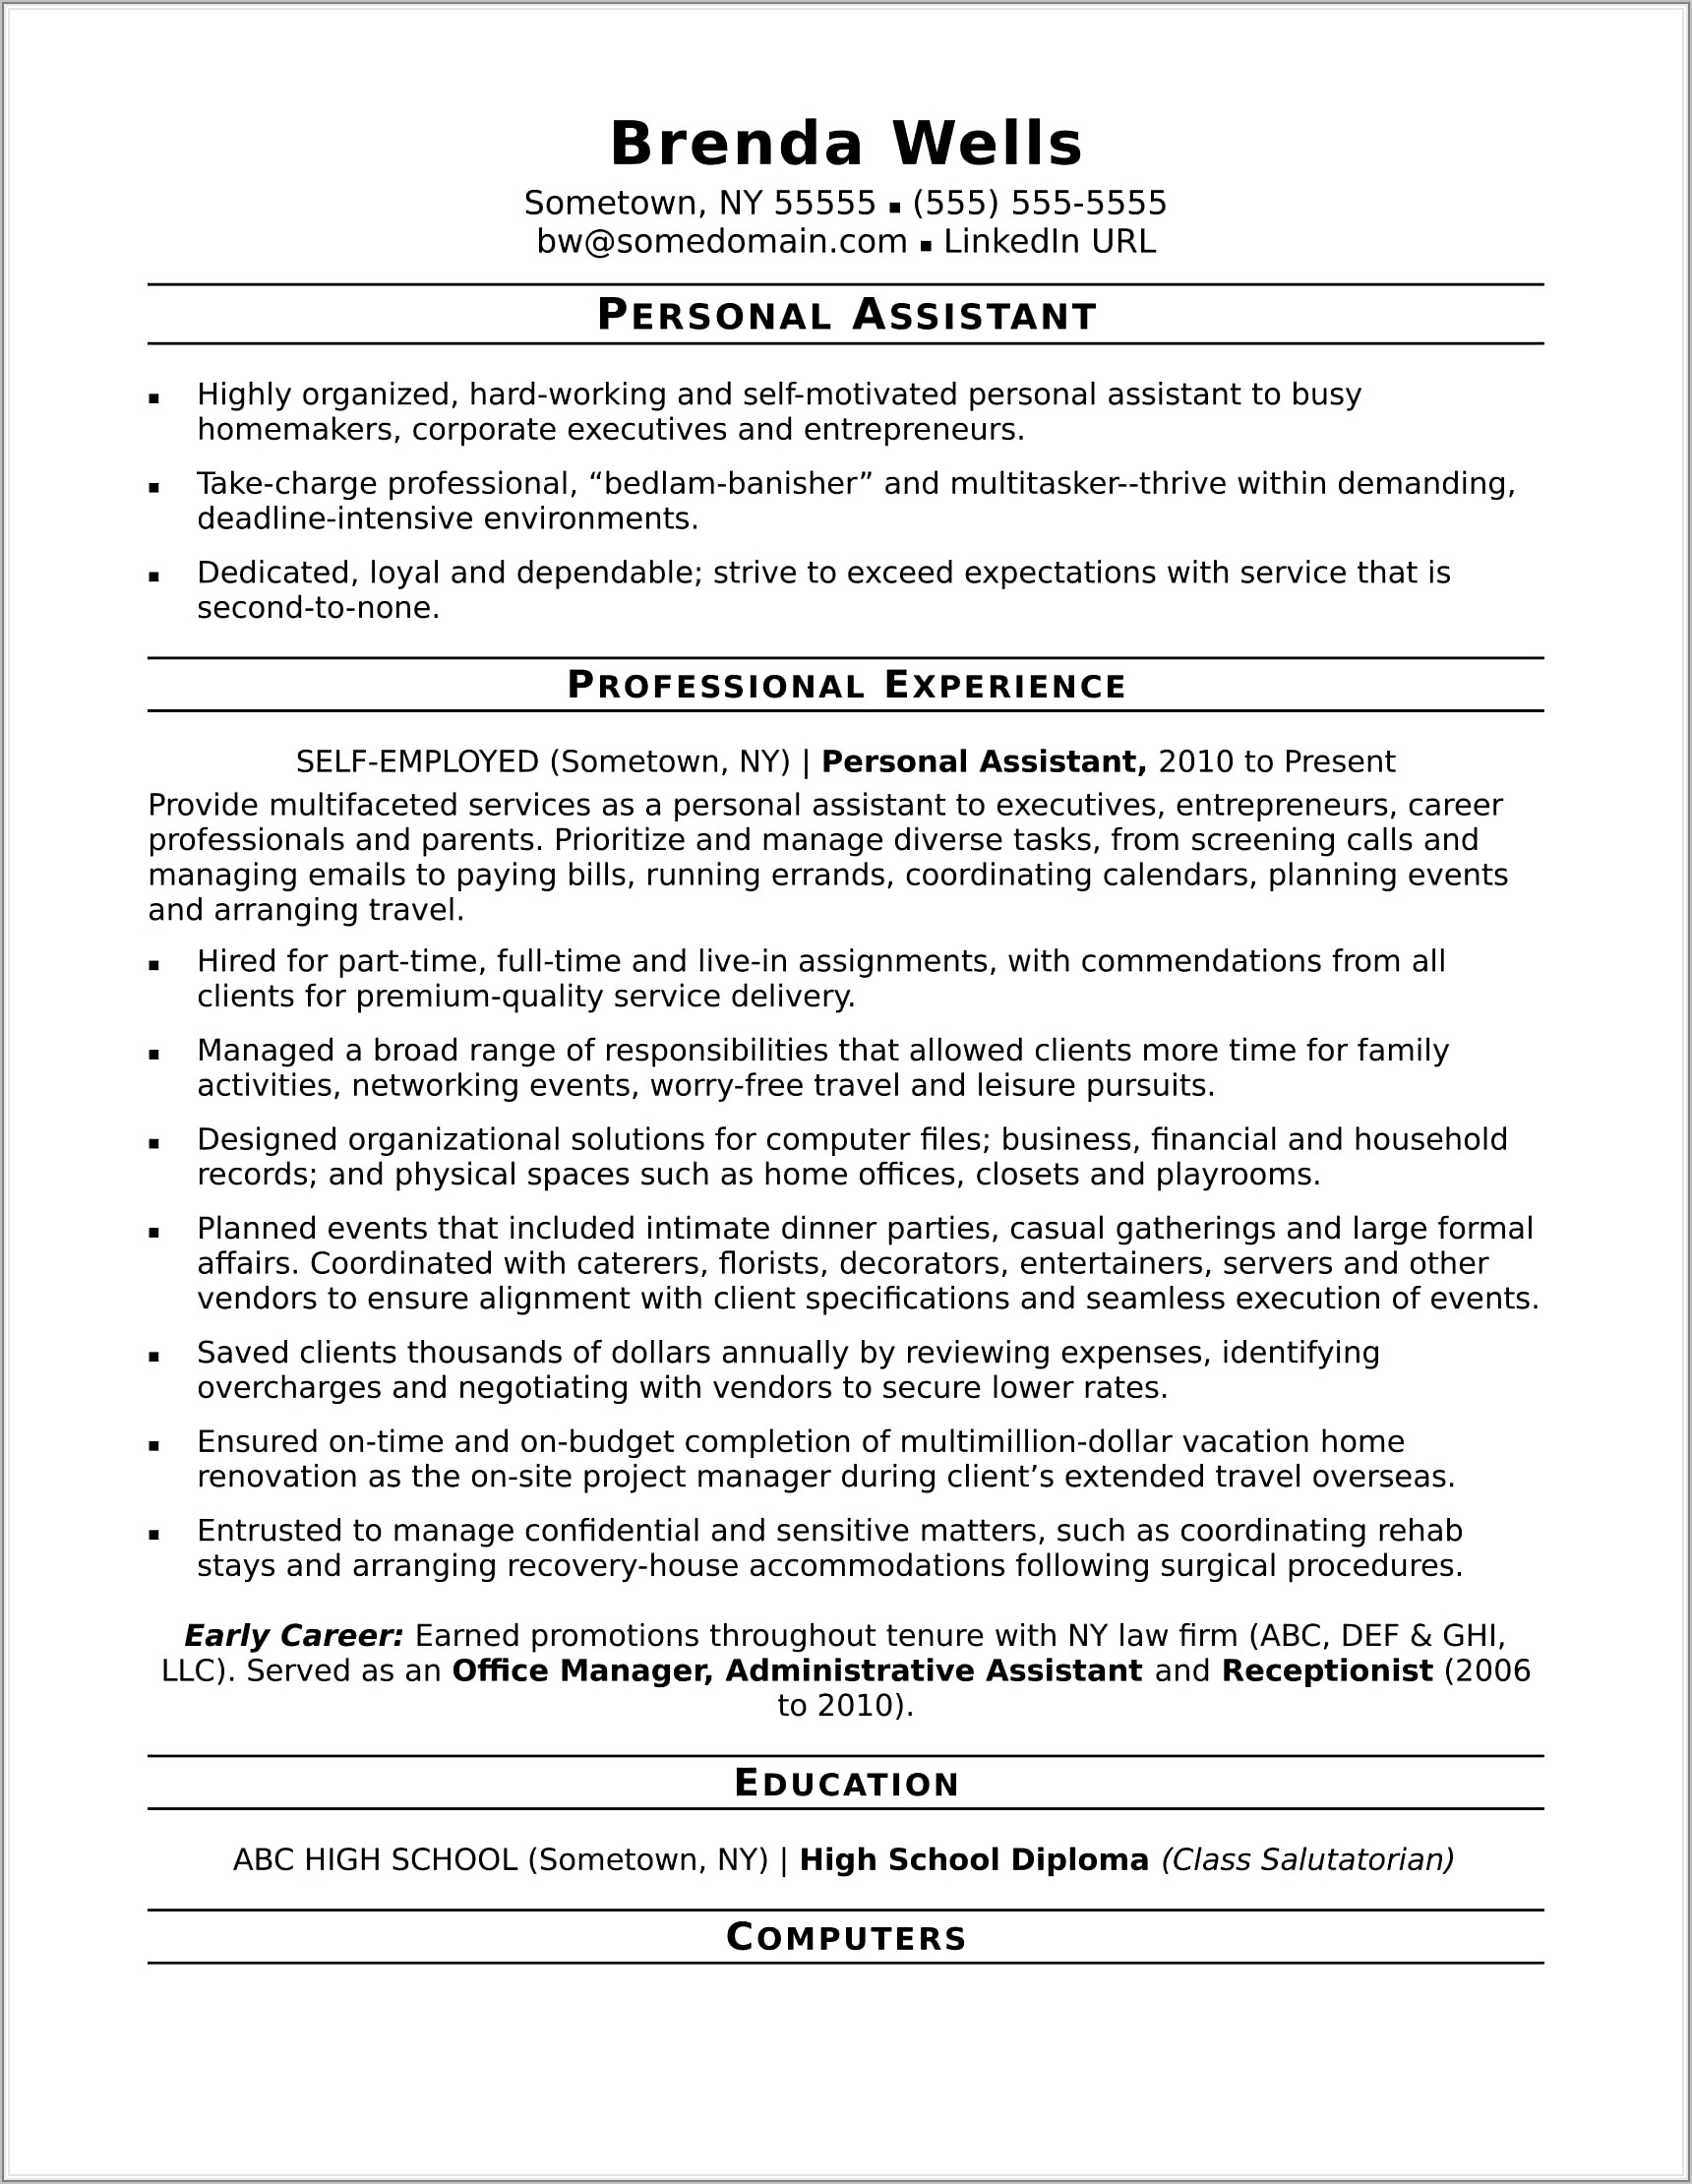 Resume Writing For Executives